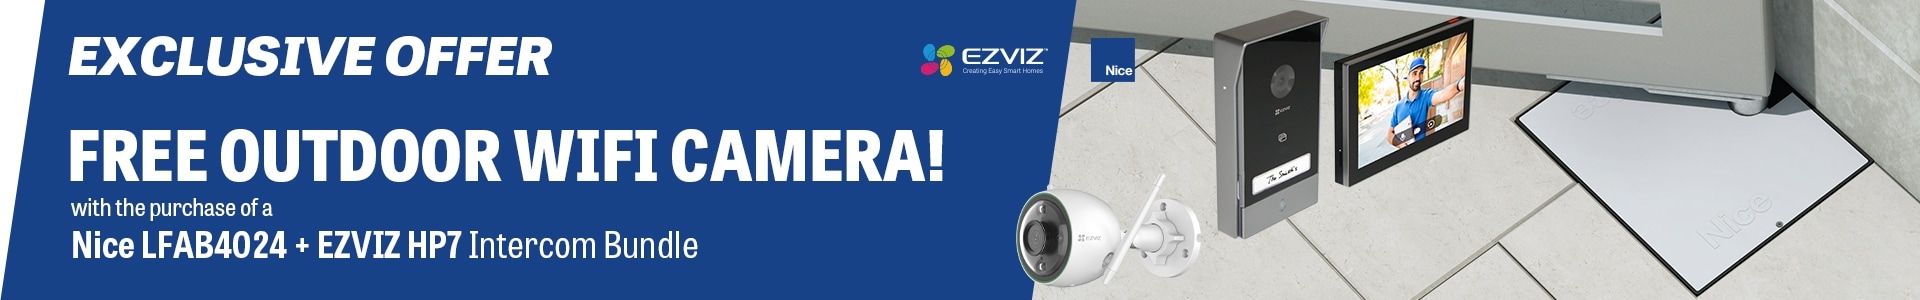 Exclusive offer! Free outdoor wifi camera with the purchase of a Nice LFAB4024 + EZVIZ HP7 Intercom Bundle